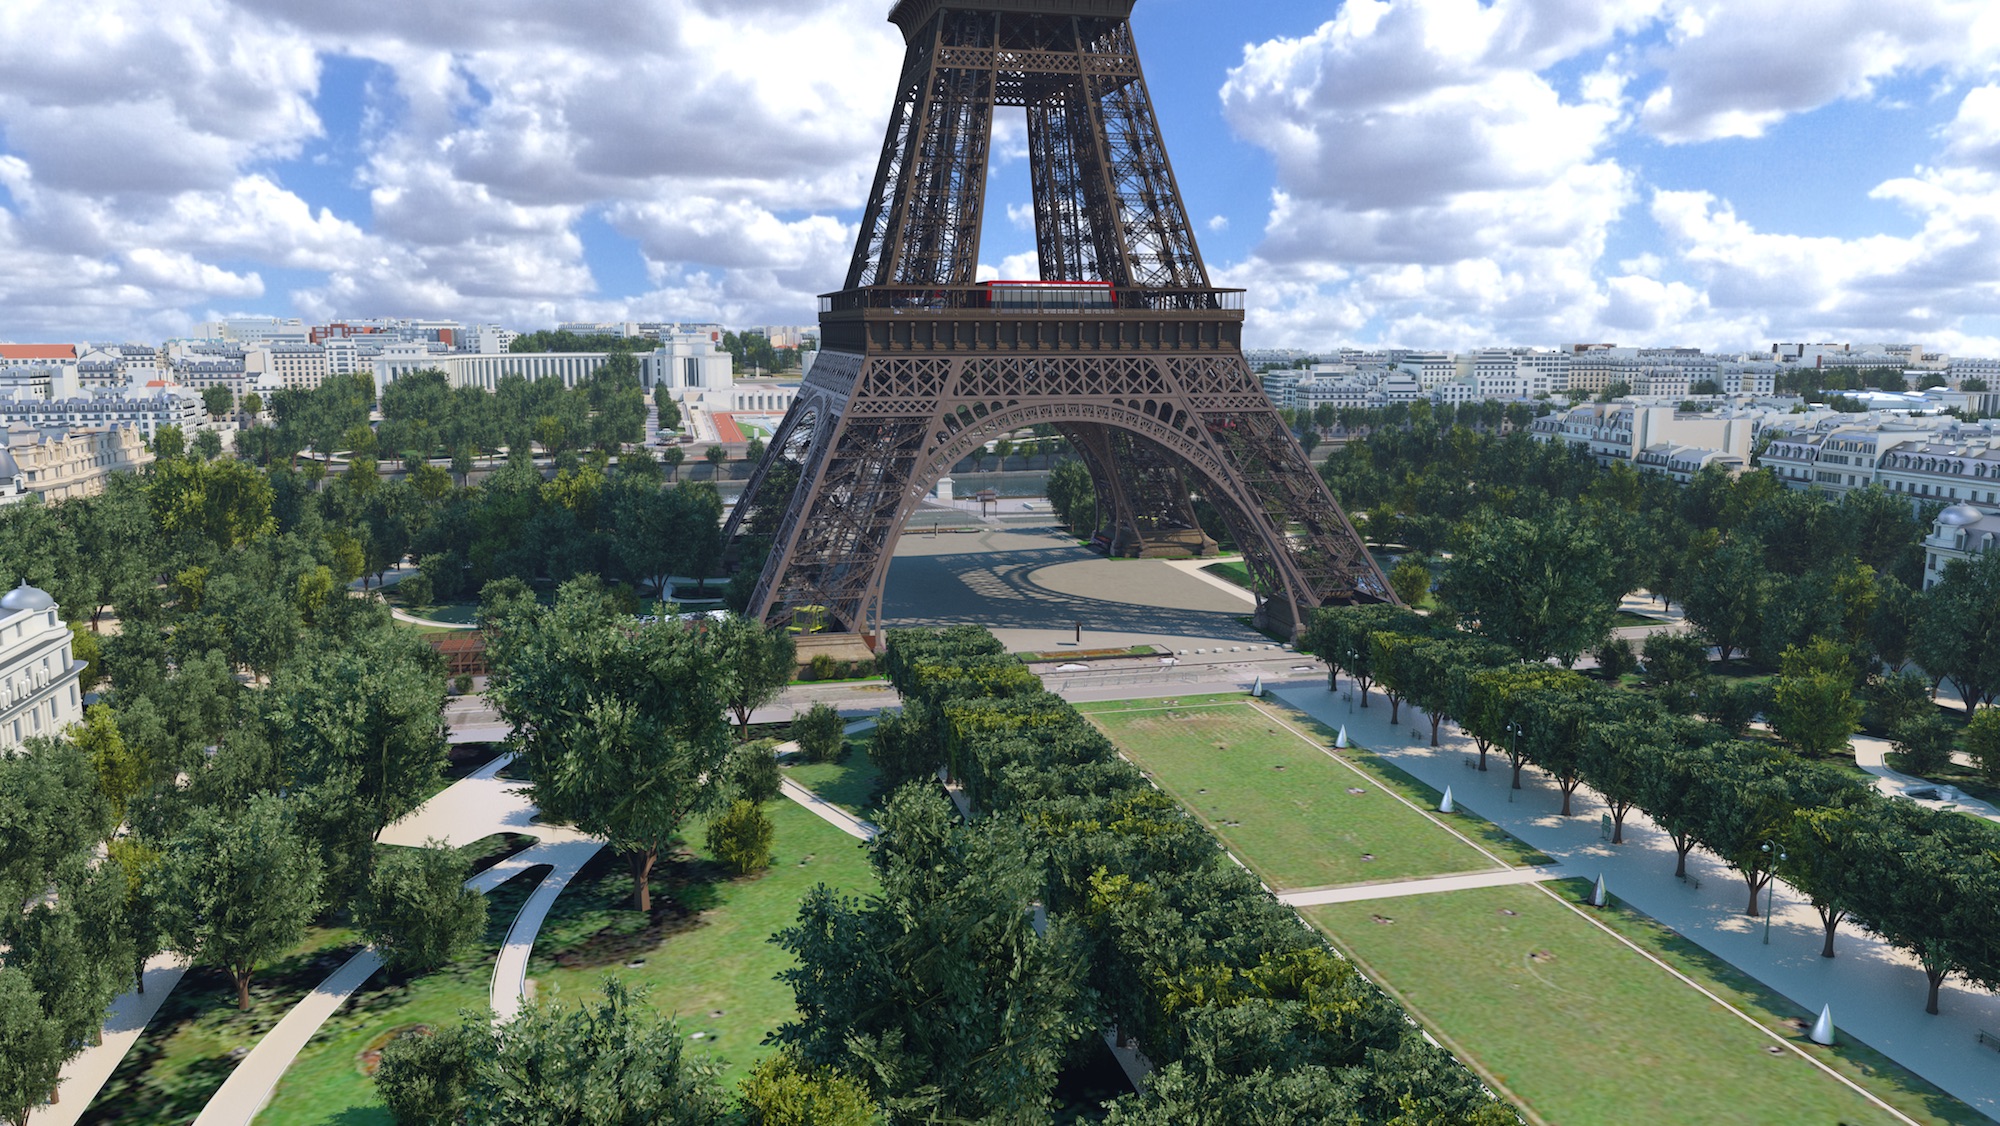 Reimagining the Eiffel Tower landscape: Autodesk partners with the City